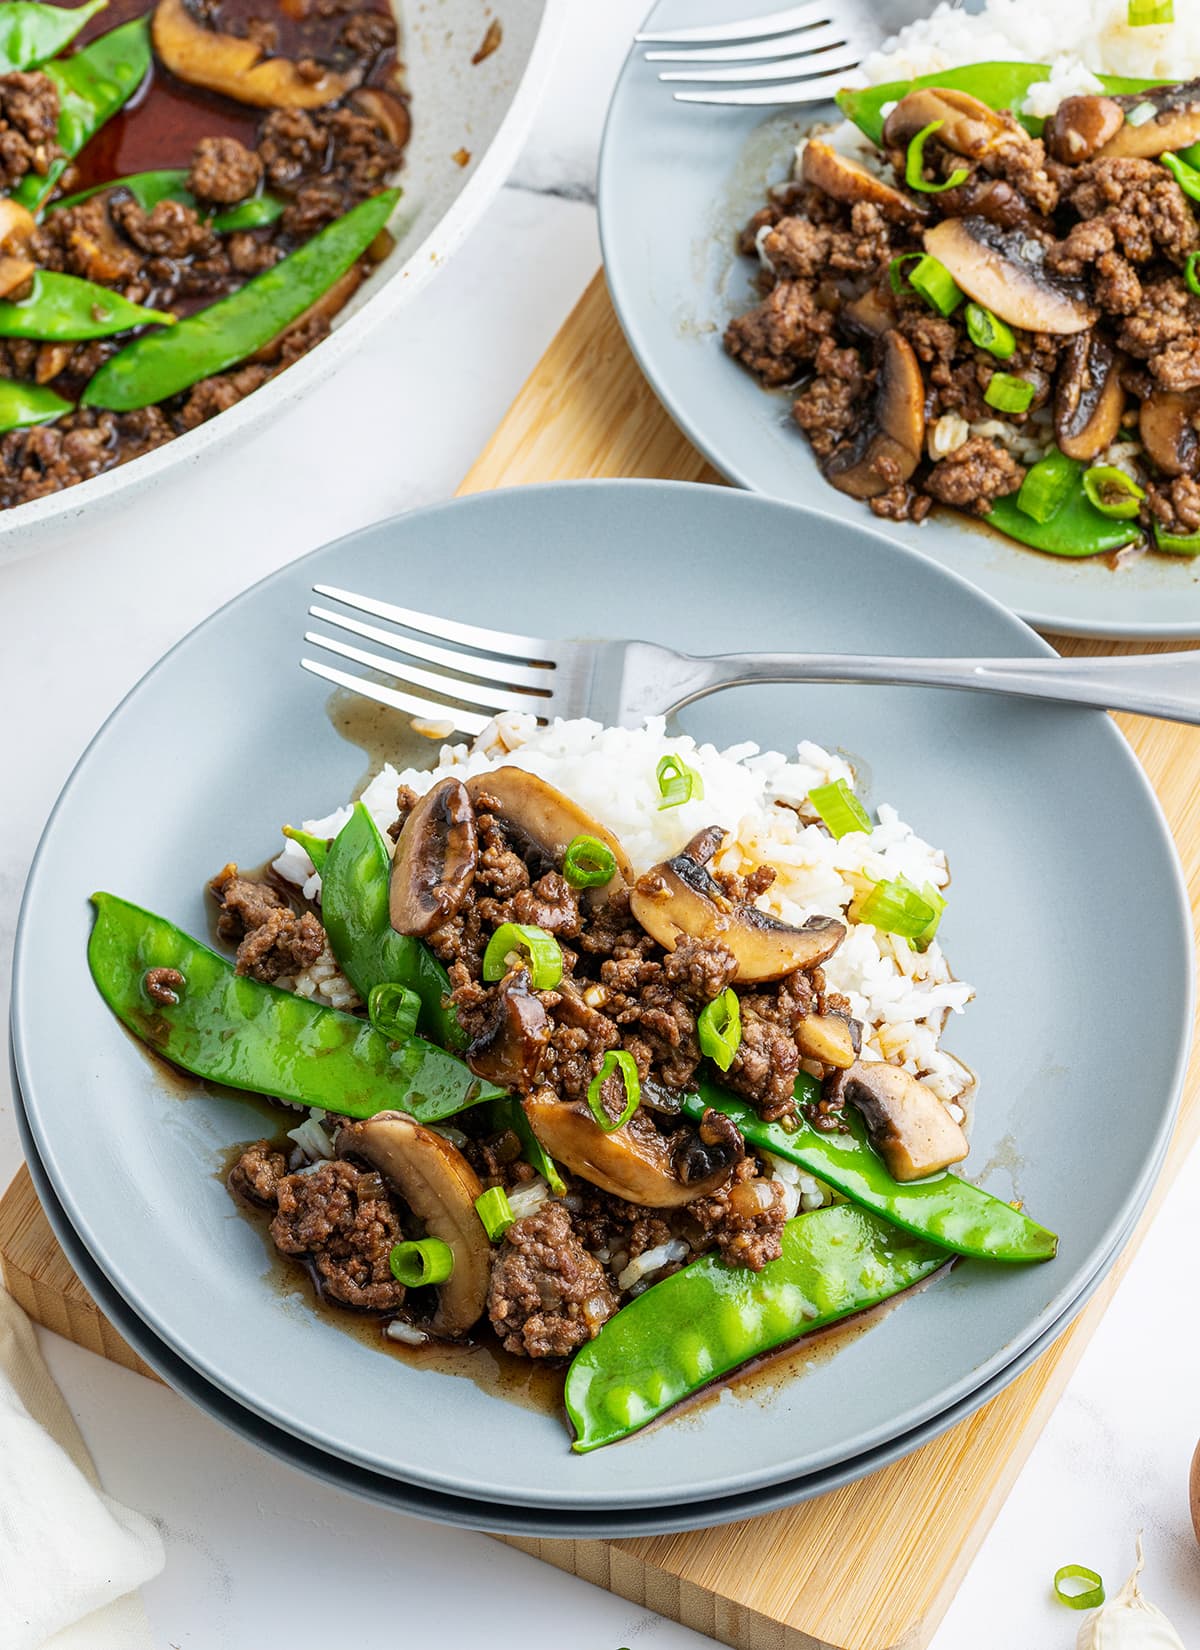 A plate of ground beef and snow peas on white rice.